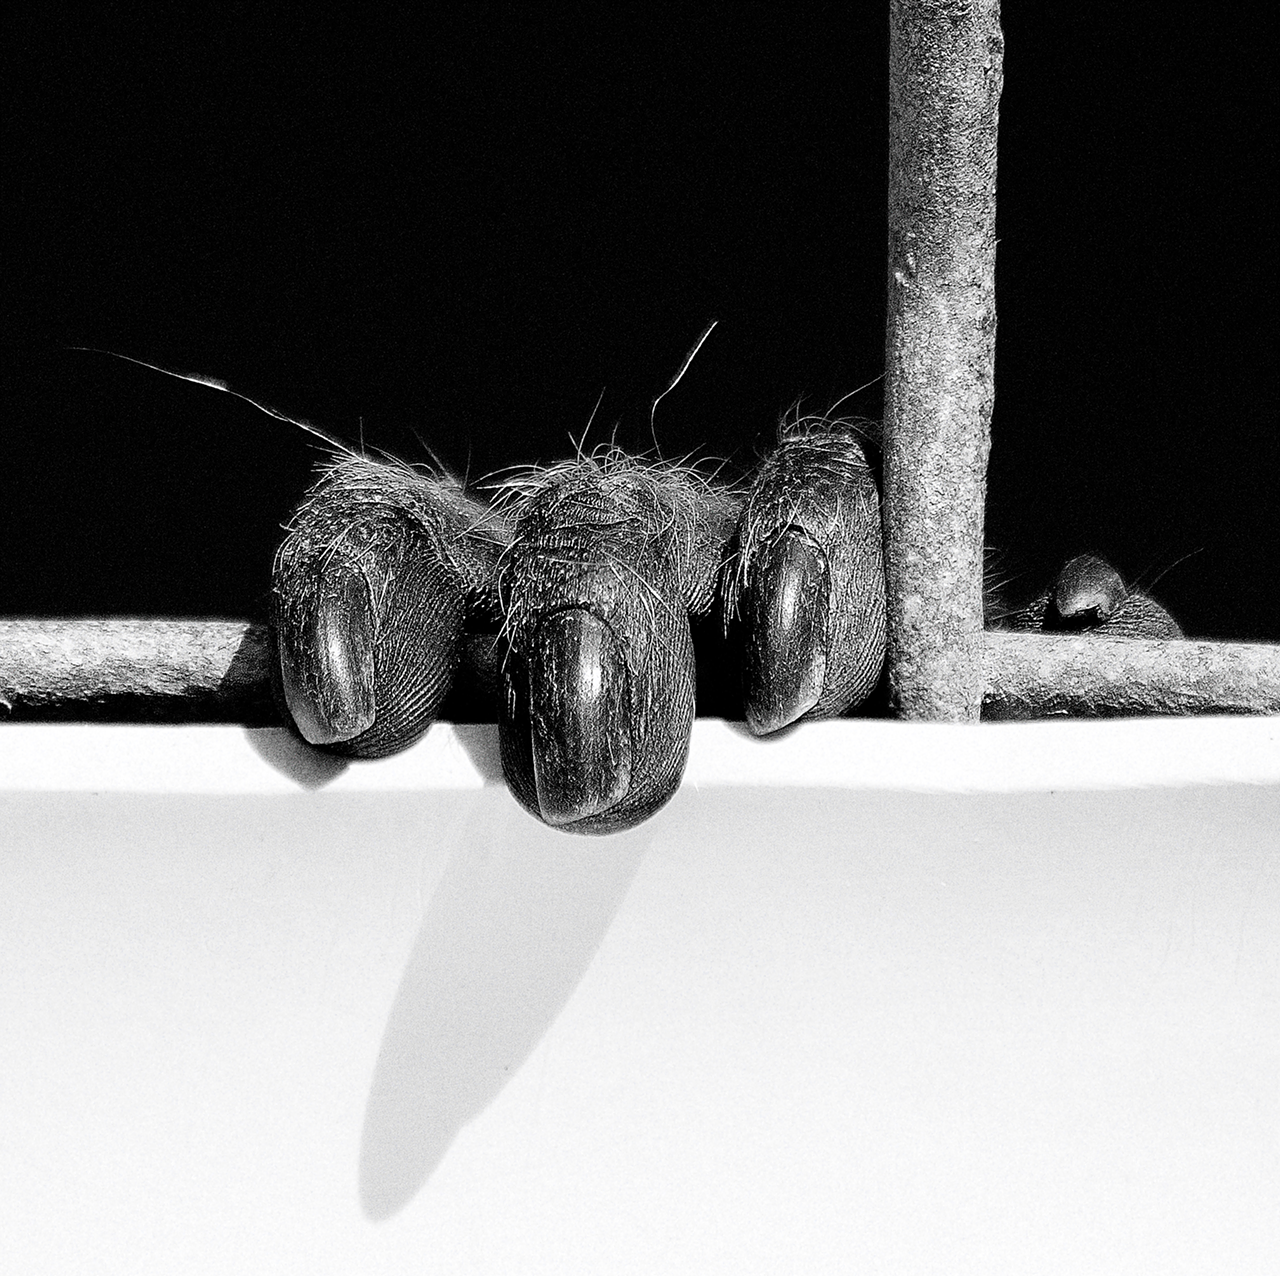 "Caged" won first place in the Nature, Science, and Animals category — and Best In Show.